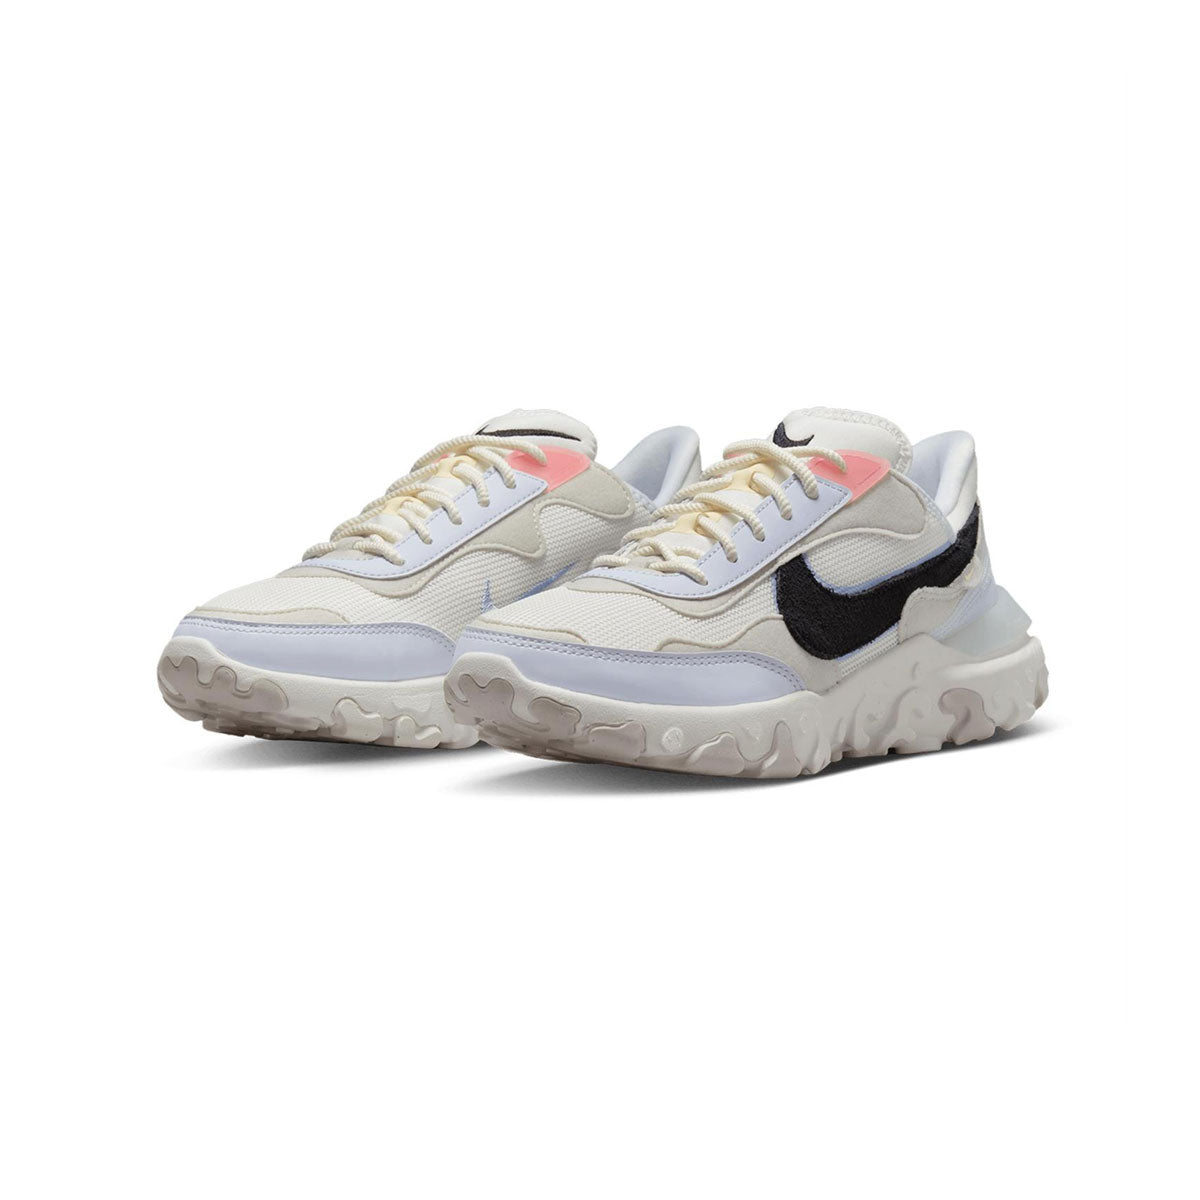 Nike Women's React Revision Shoes